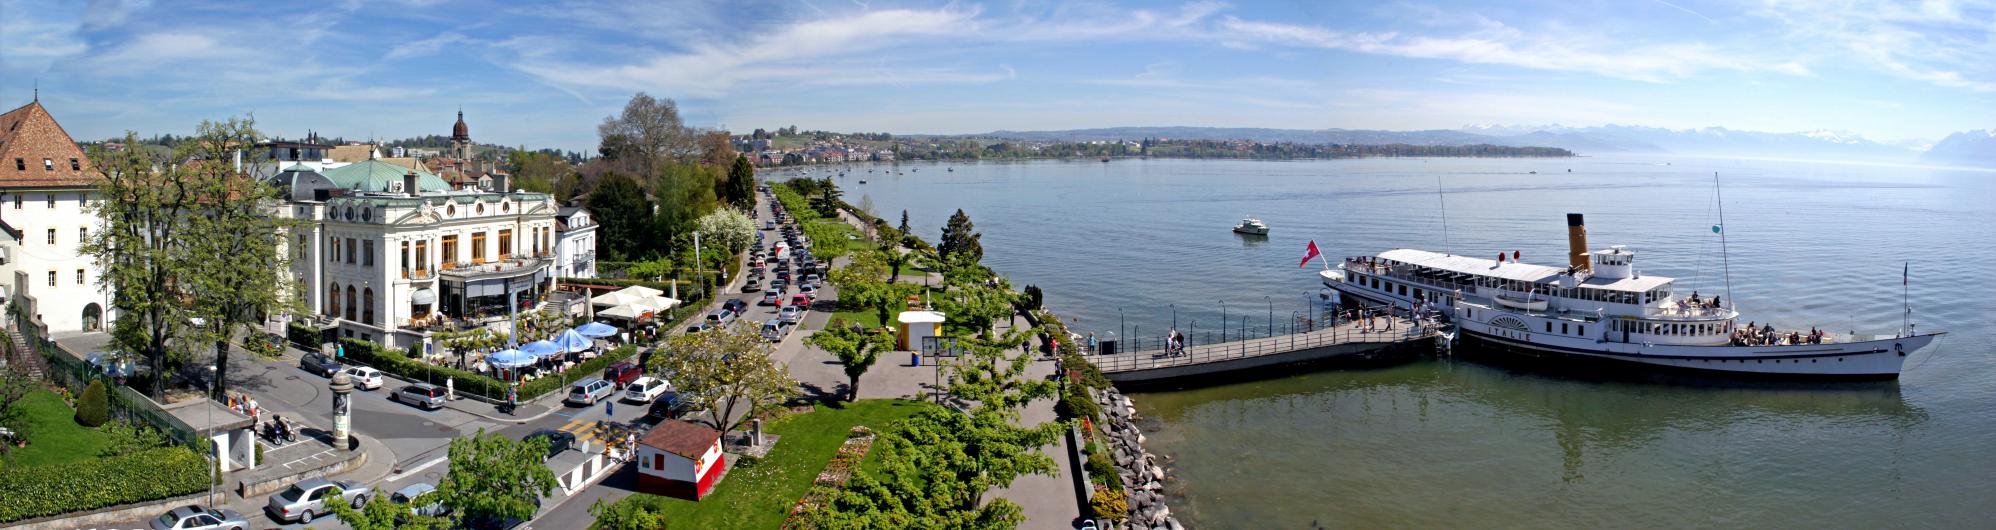 The Casino of Morges